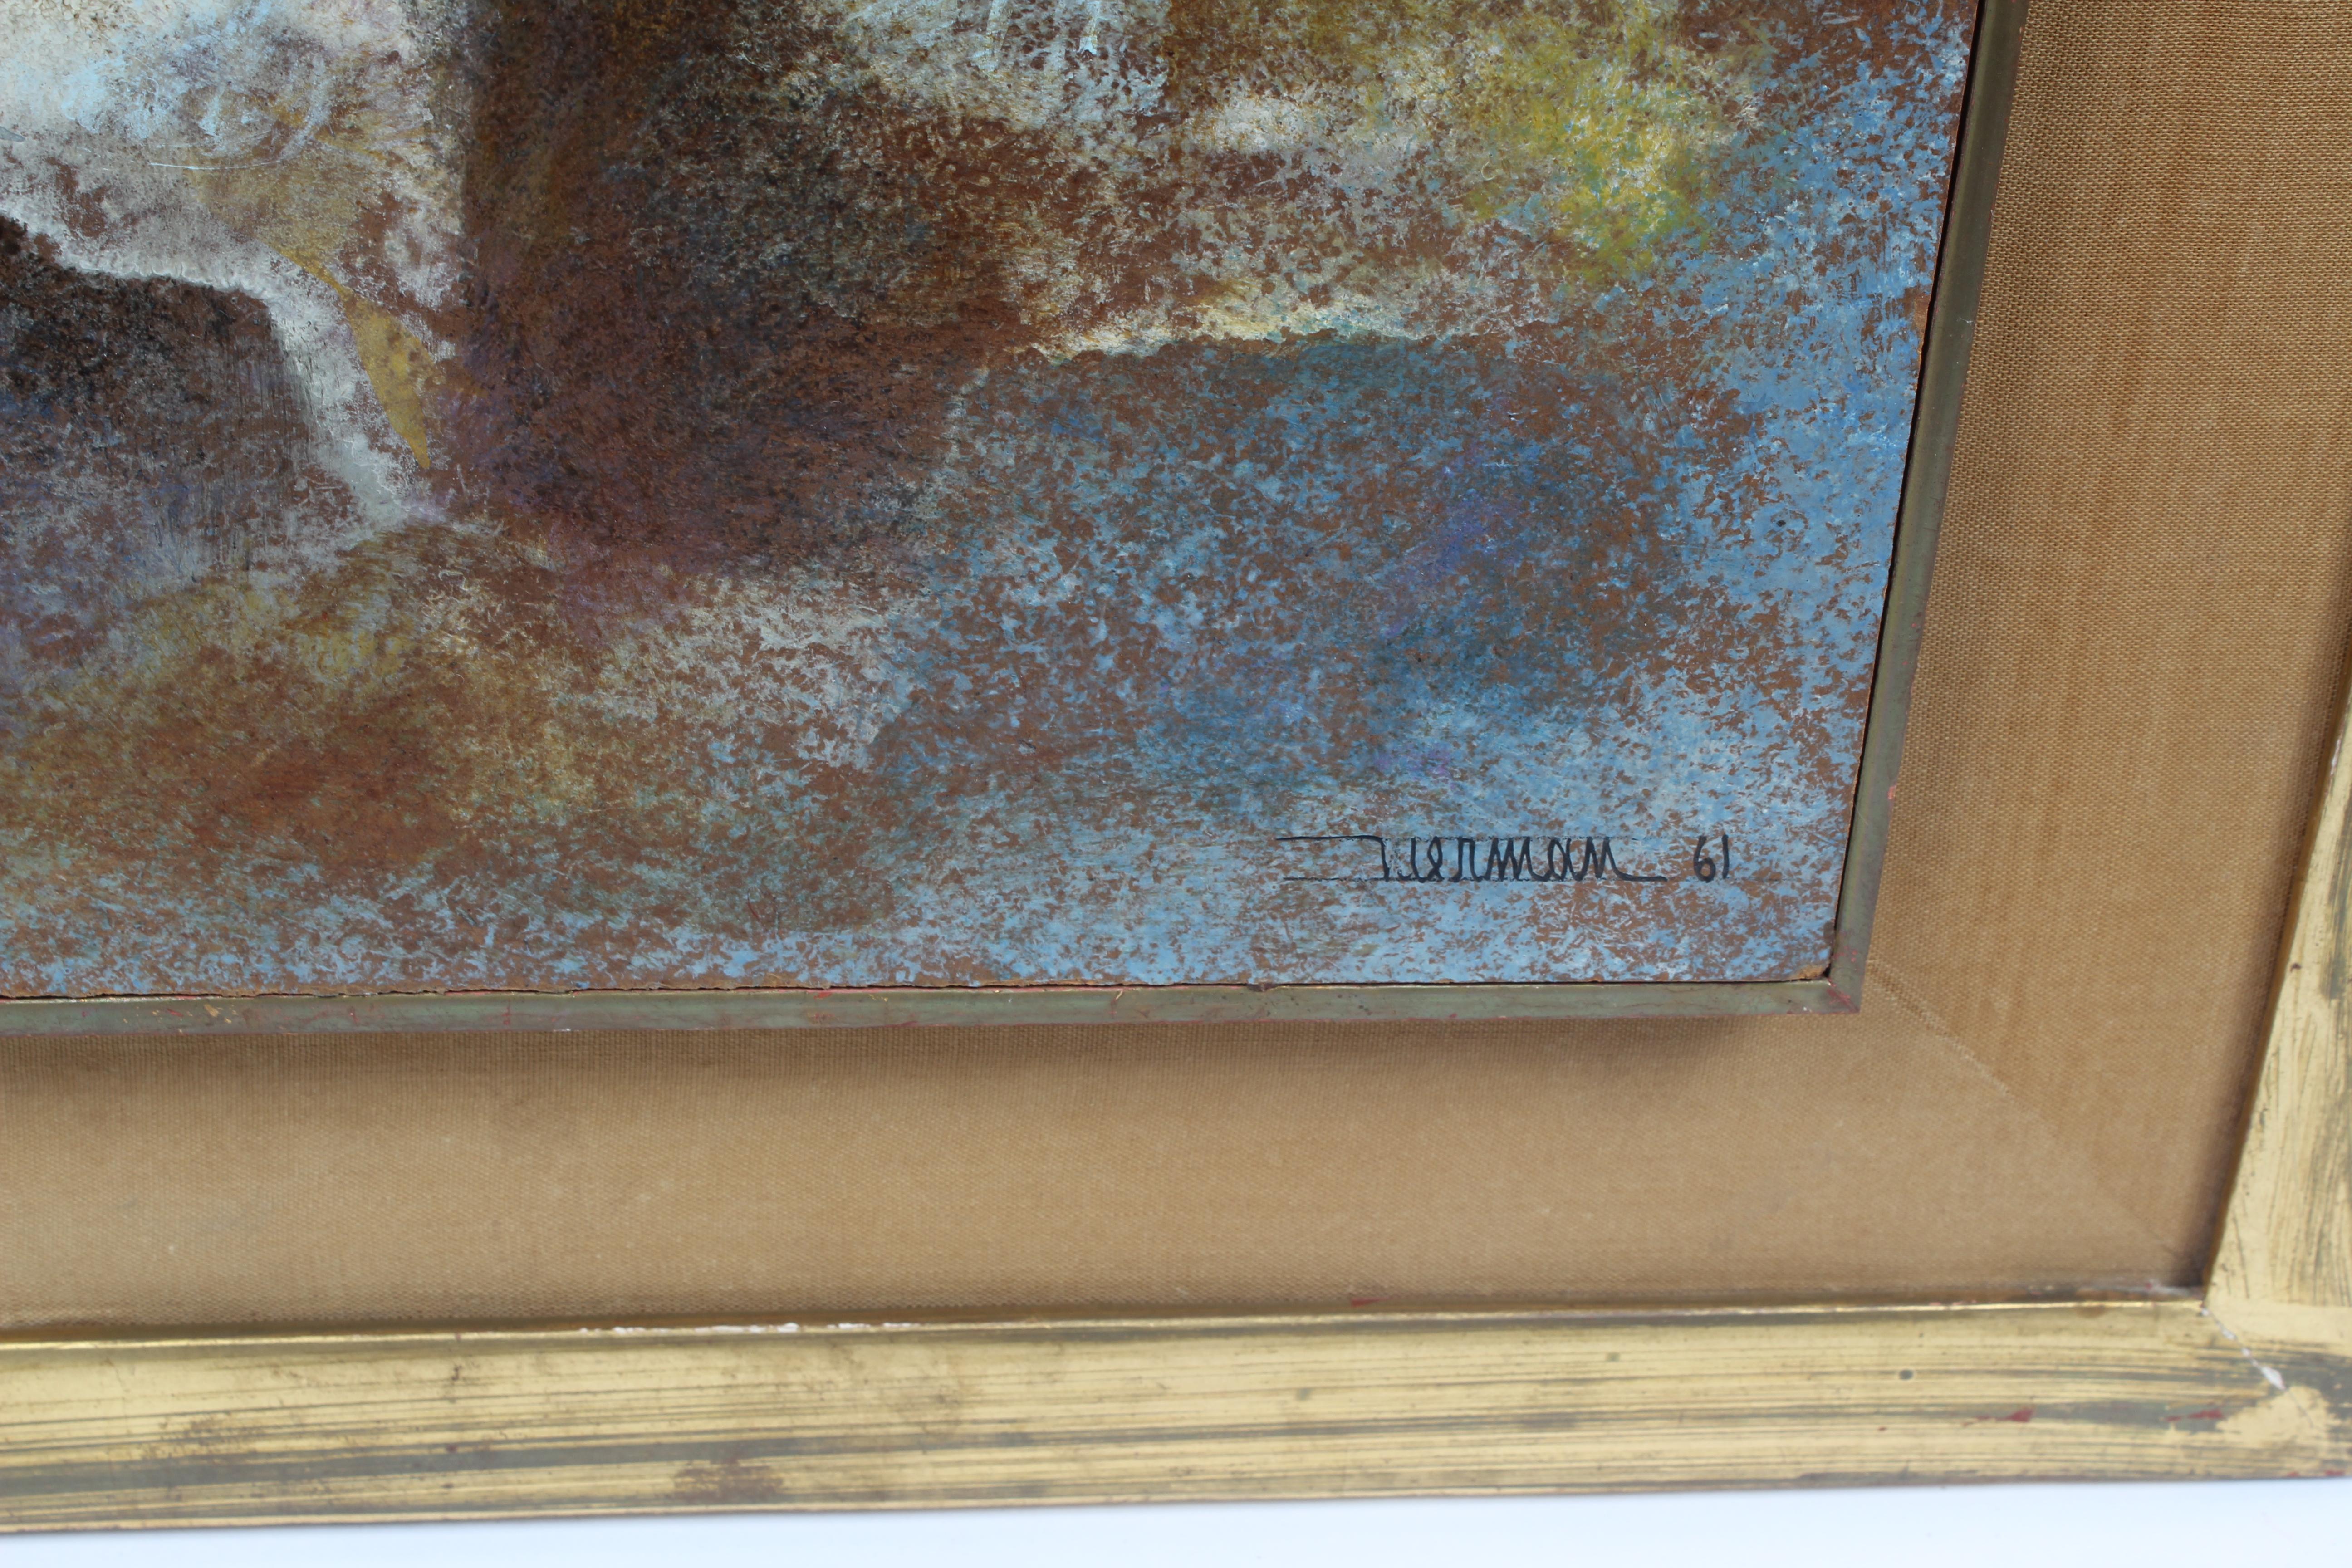 An original oil on masonite painting by well listed Mexican artist Leonardo Nierman.

This work comes in a unique gold frame presentation which is likely original to the piece.  

Signed and dated 1961 lower right, and comes with a COA.

Abstract